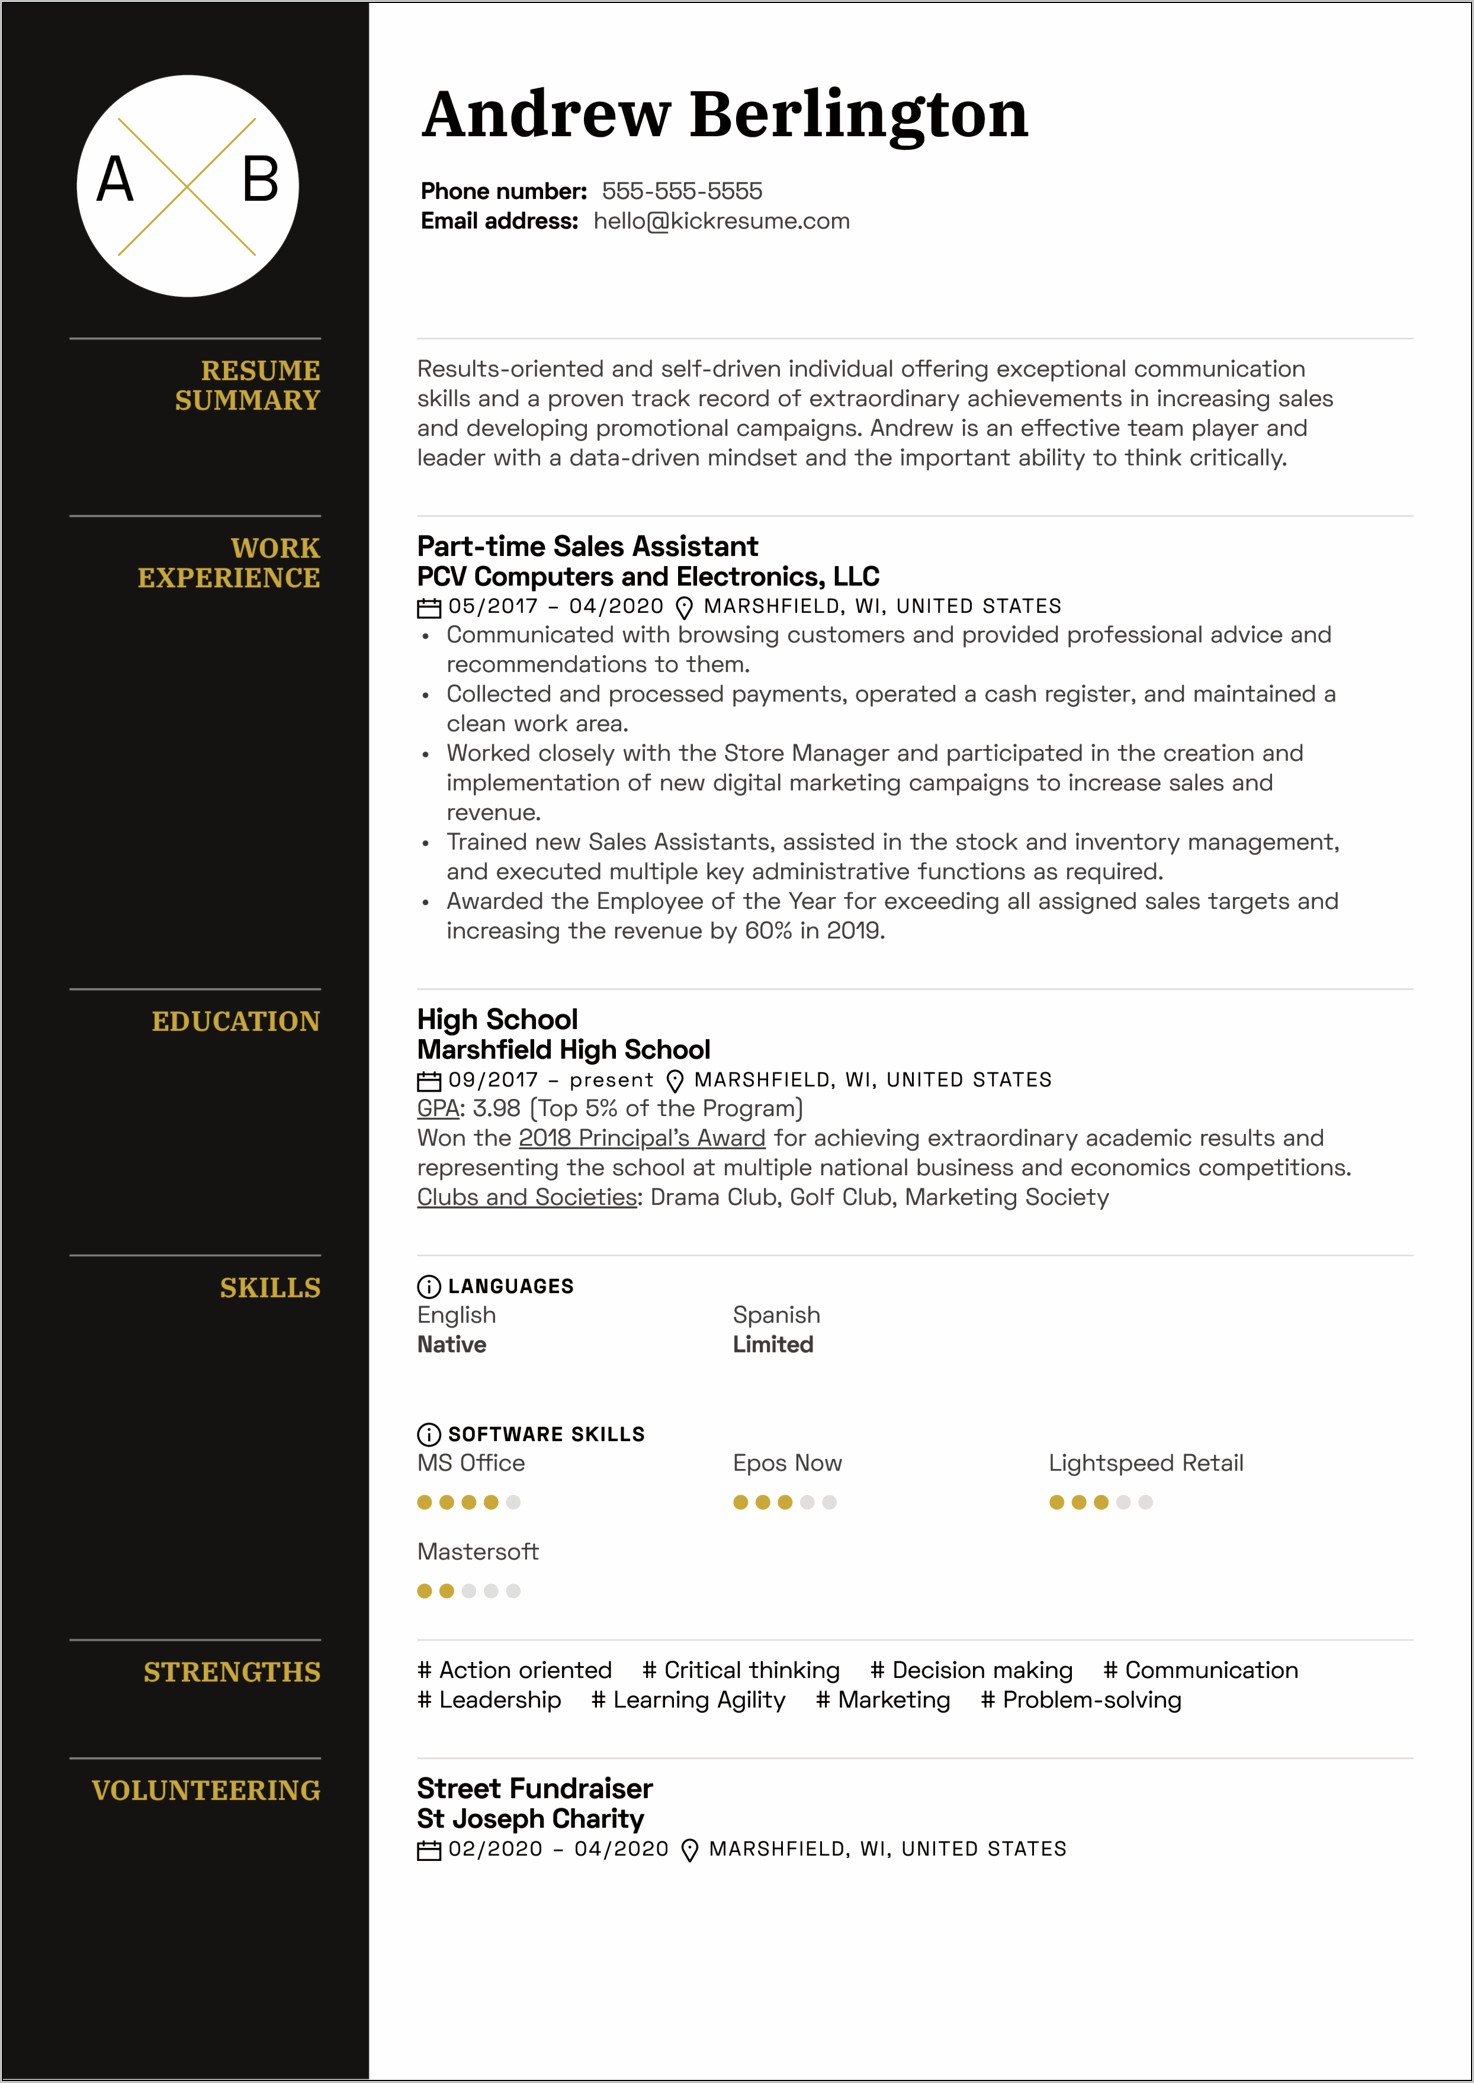 Best Summery For Young Person Resume